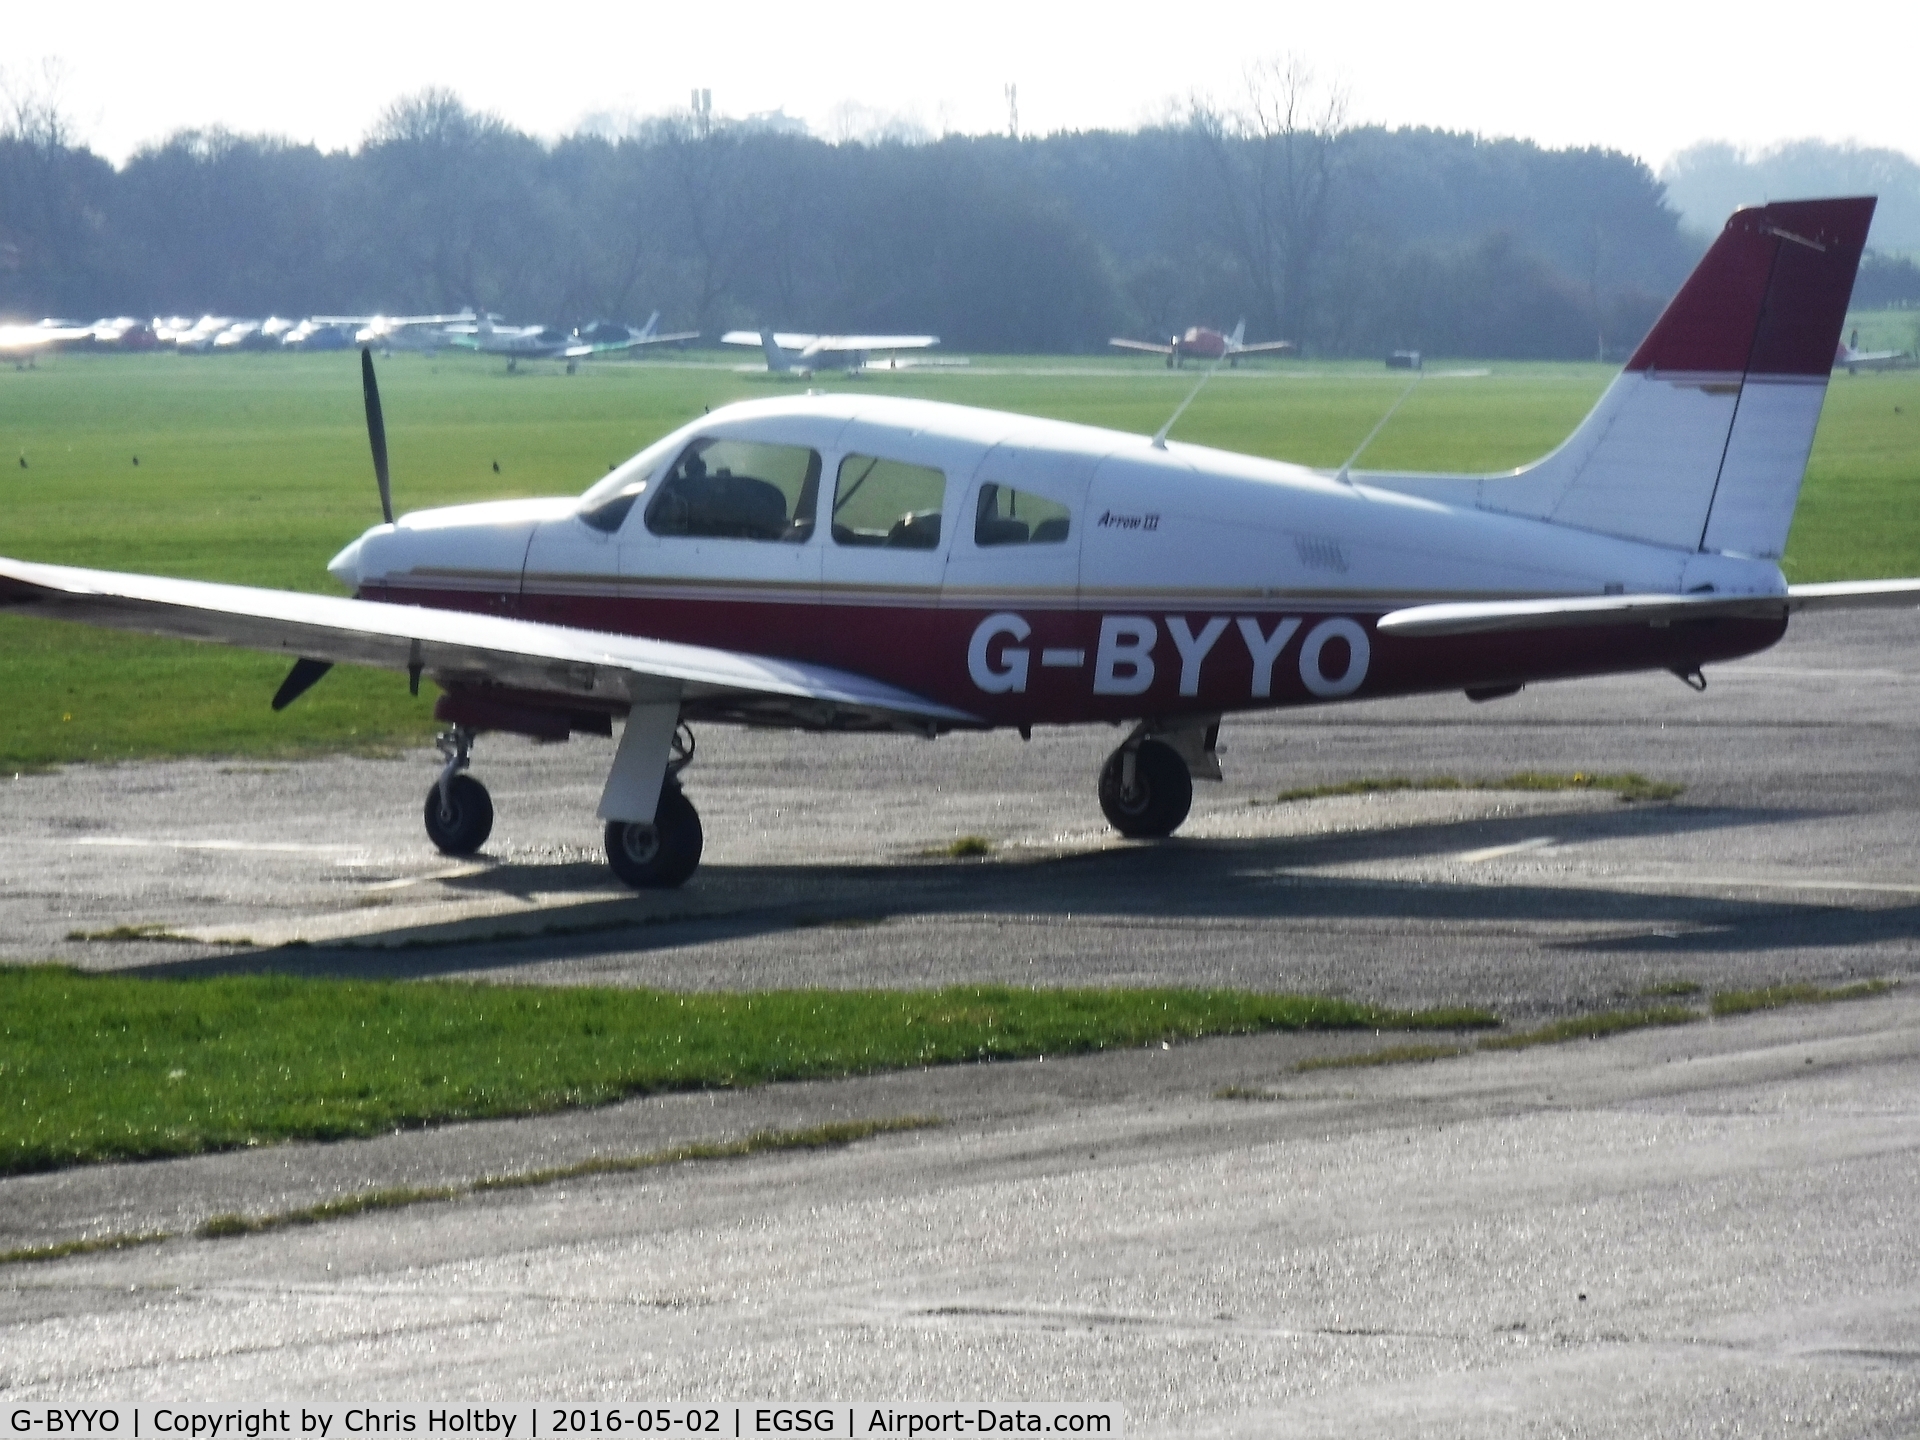 G-BYYO, 1994 Piper PA-28R-201 Cherokee Arrow III C/N 28R-2837061, Parked at its base at Stapleford Tawney, Essex